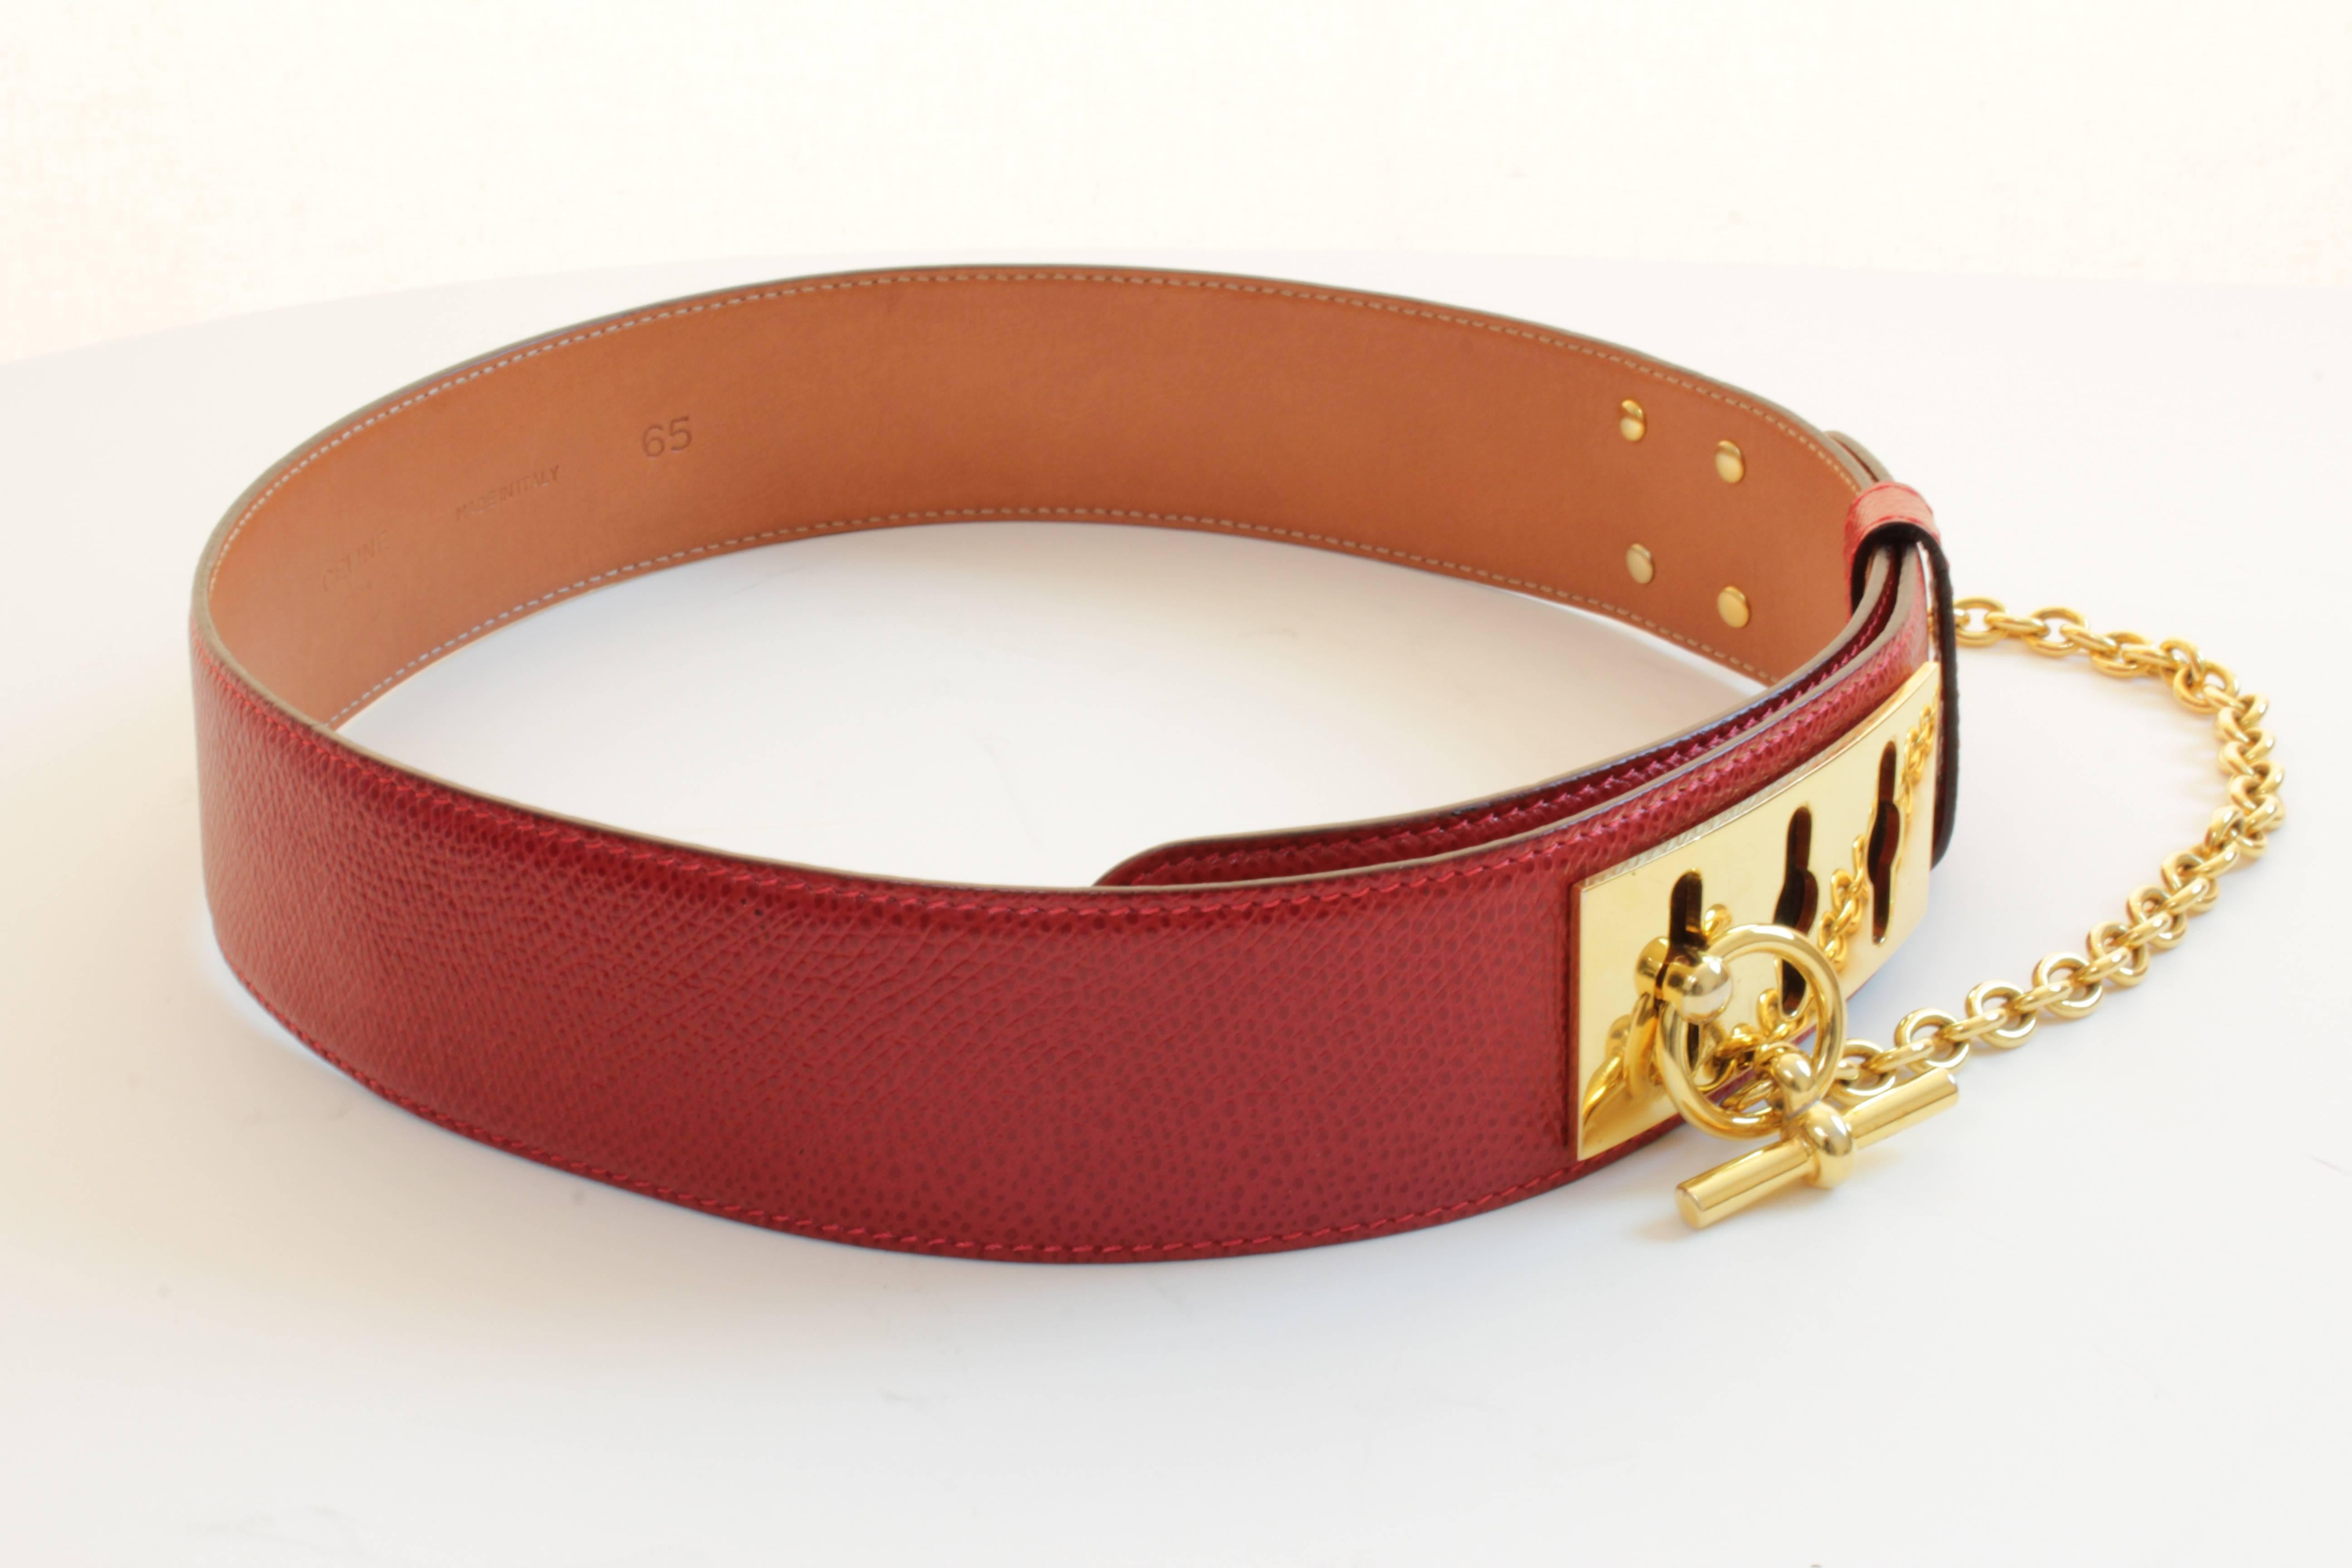 leather belt with chain detail